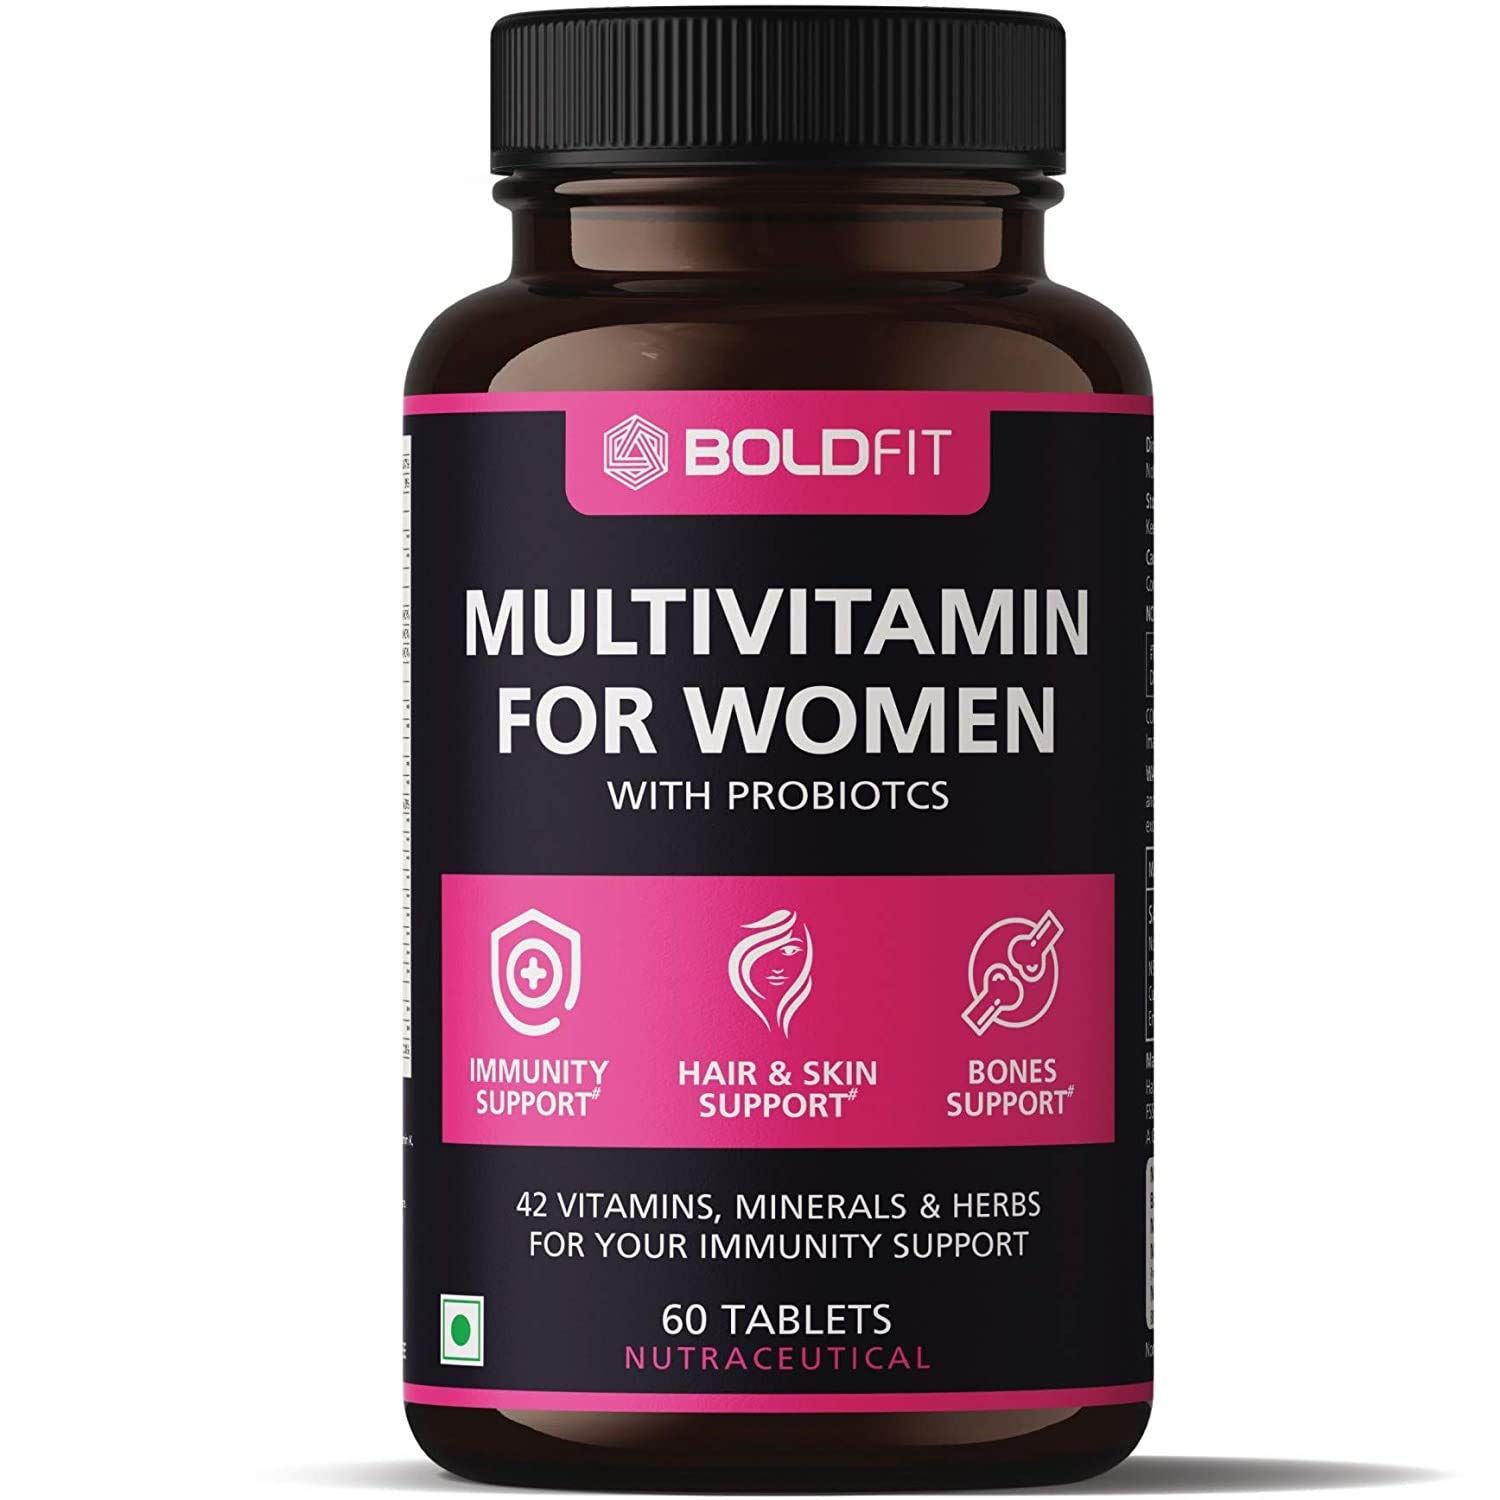 Bold Fit Multivitamin For Women Image